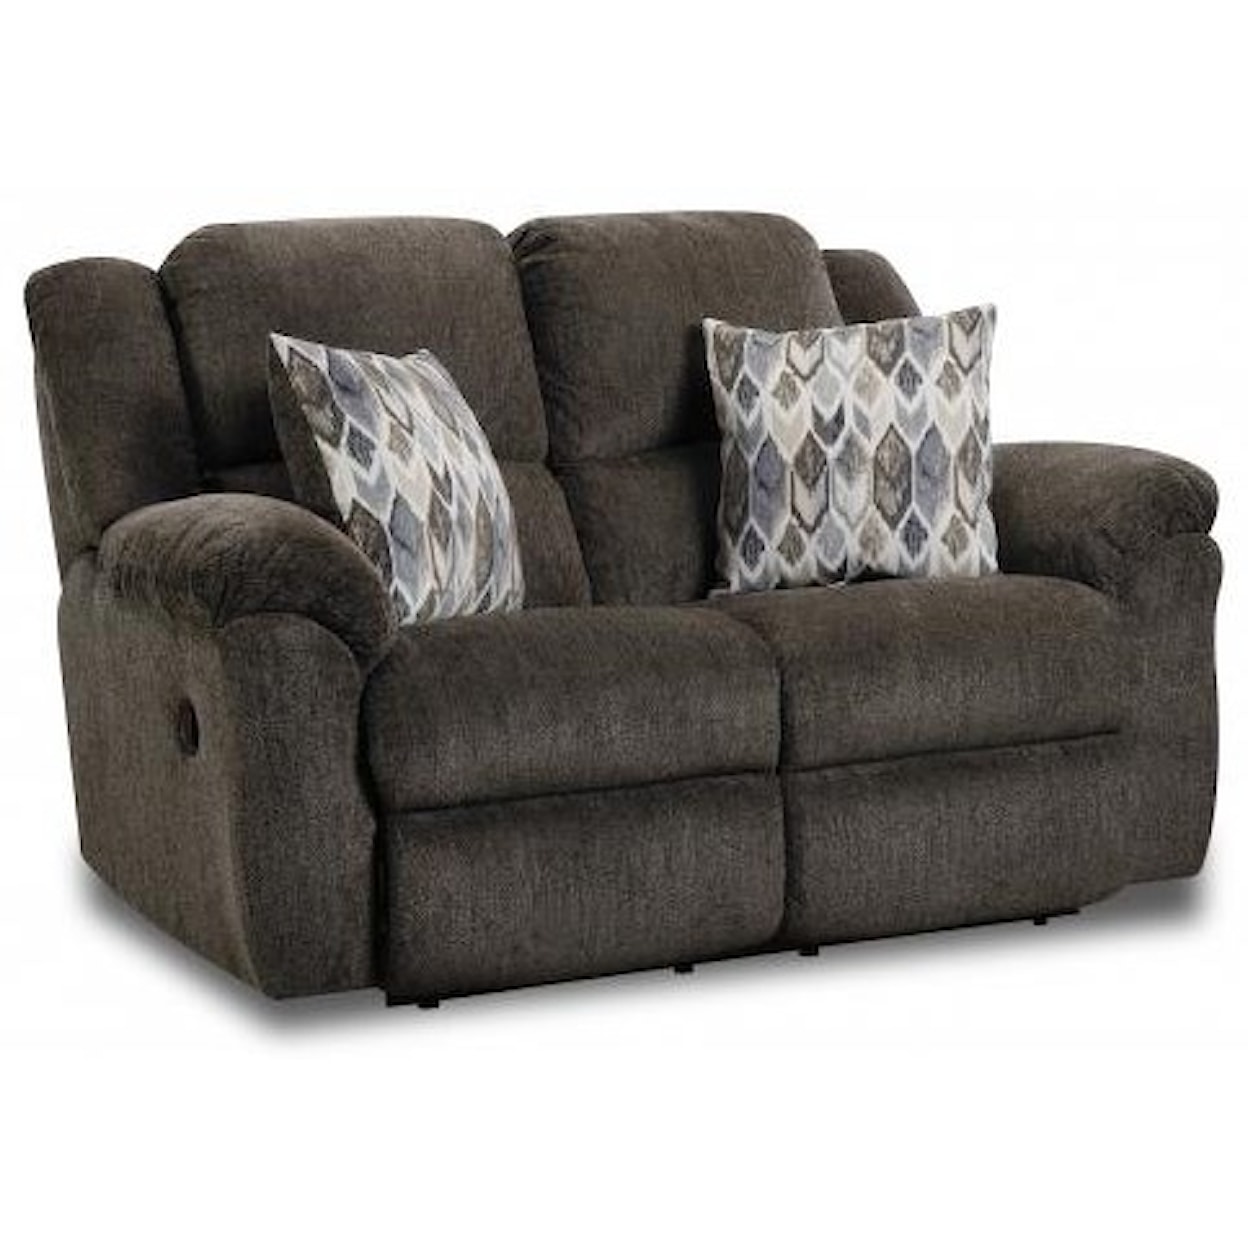 HomeStretch 173 OLD 2 Double Reclining Loveseat